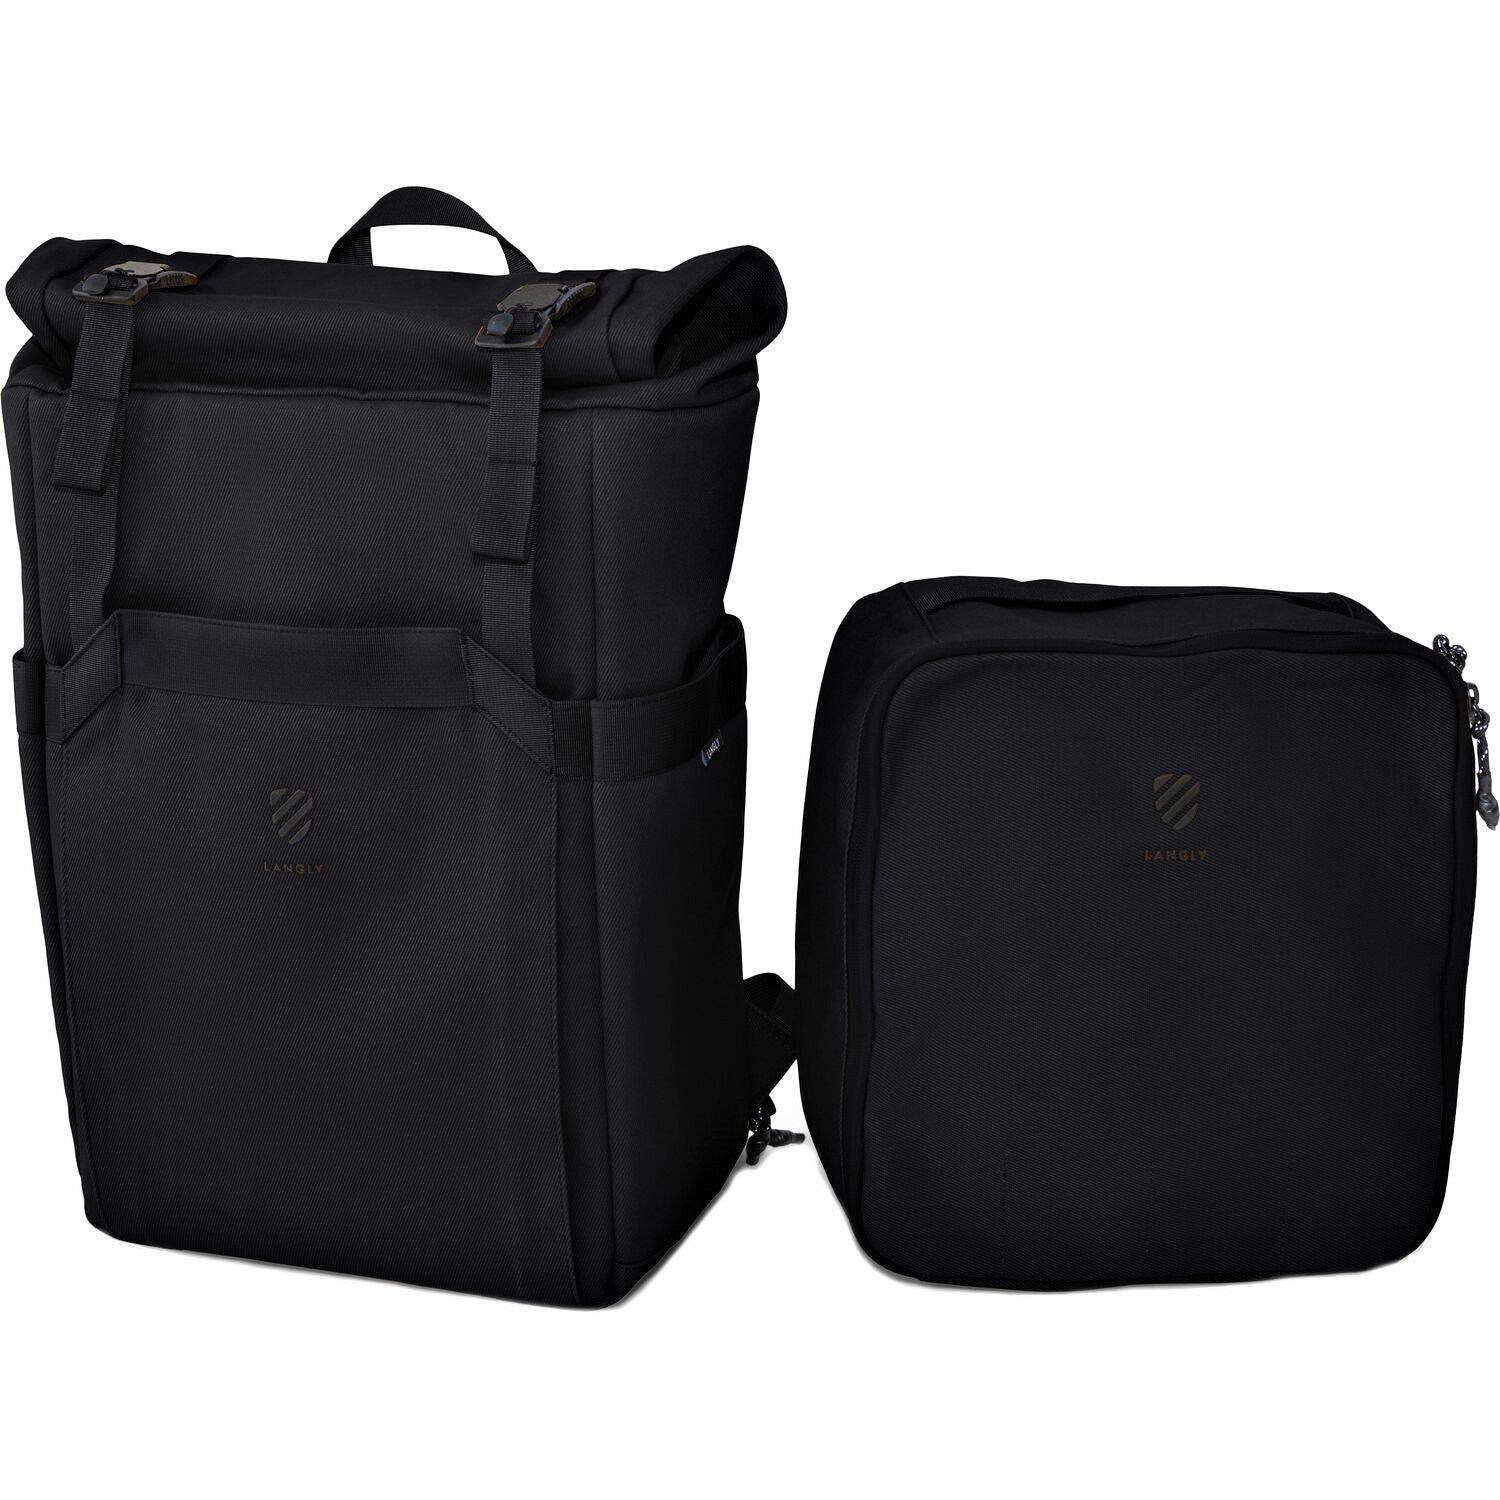 Langly Weekender Backpack with Camera Cube (Black)